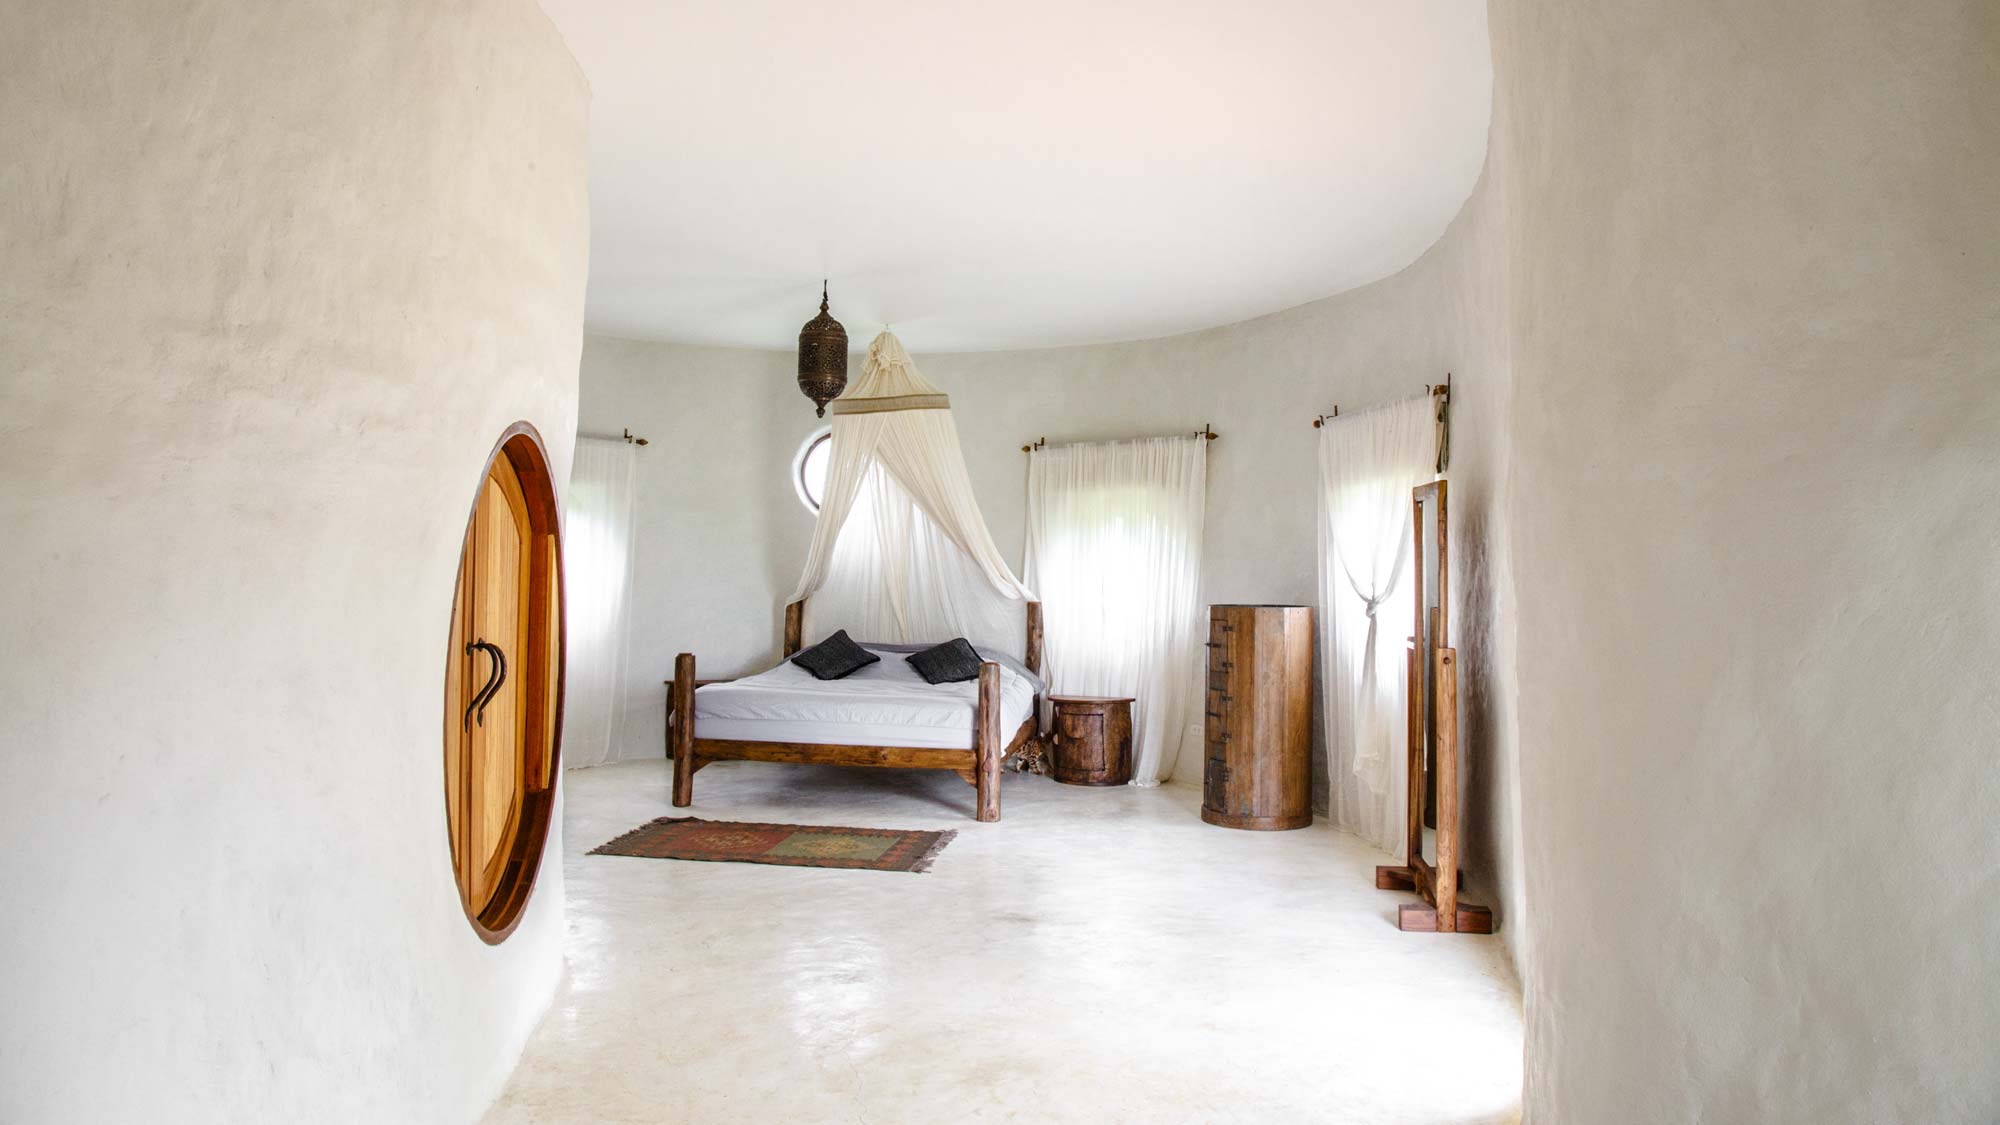 View along a curved adobe walls and round wooden doorway of the bed in the Hobbit Villa at the Chiang Mai Mala Dhara Eco Resort & Yoga Retreat Center, adorned with a hand made cotton mosquito net and surrounded by carefully chosen wooden furniture.